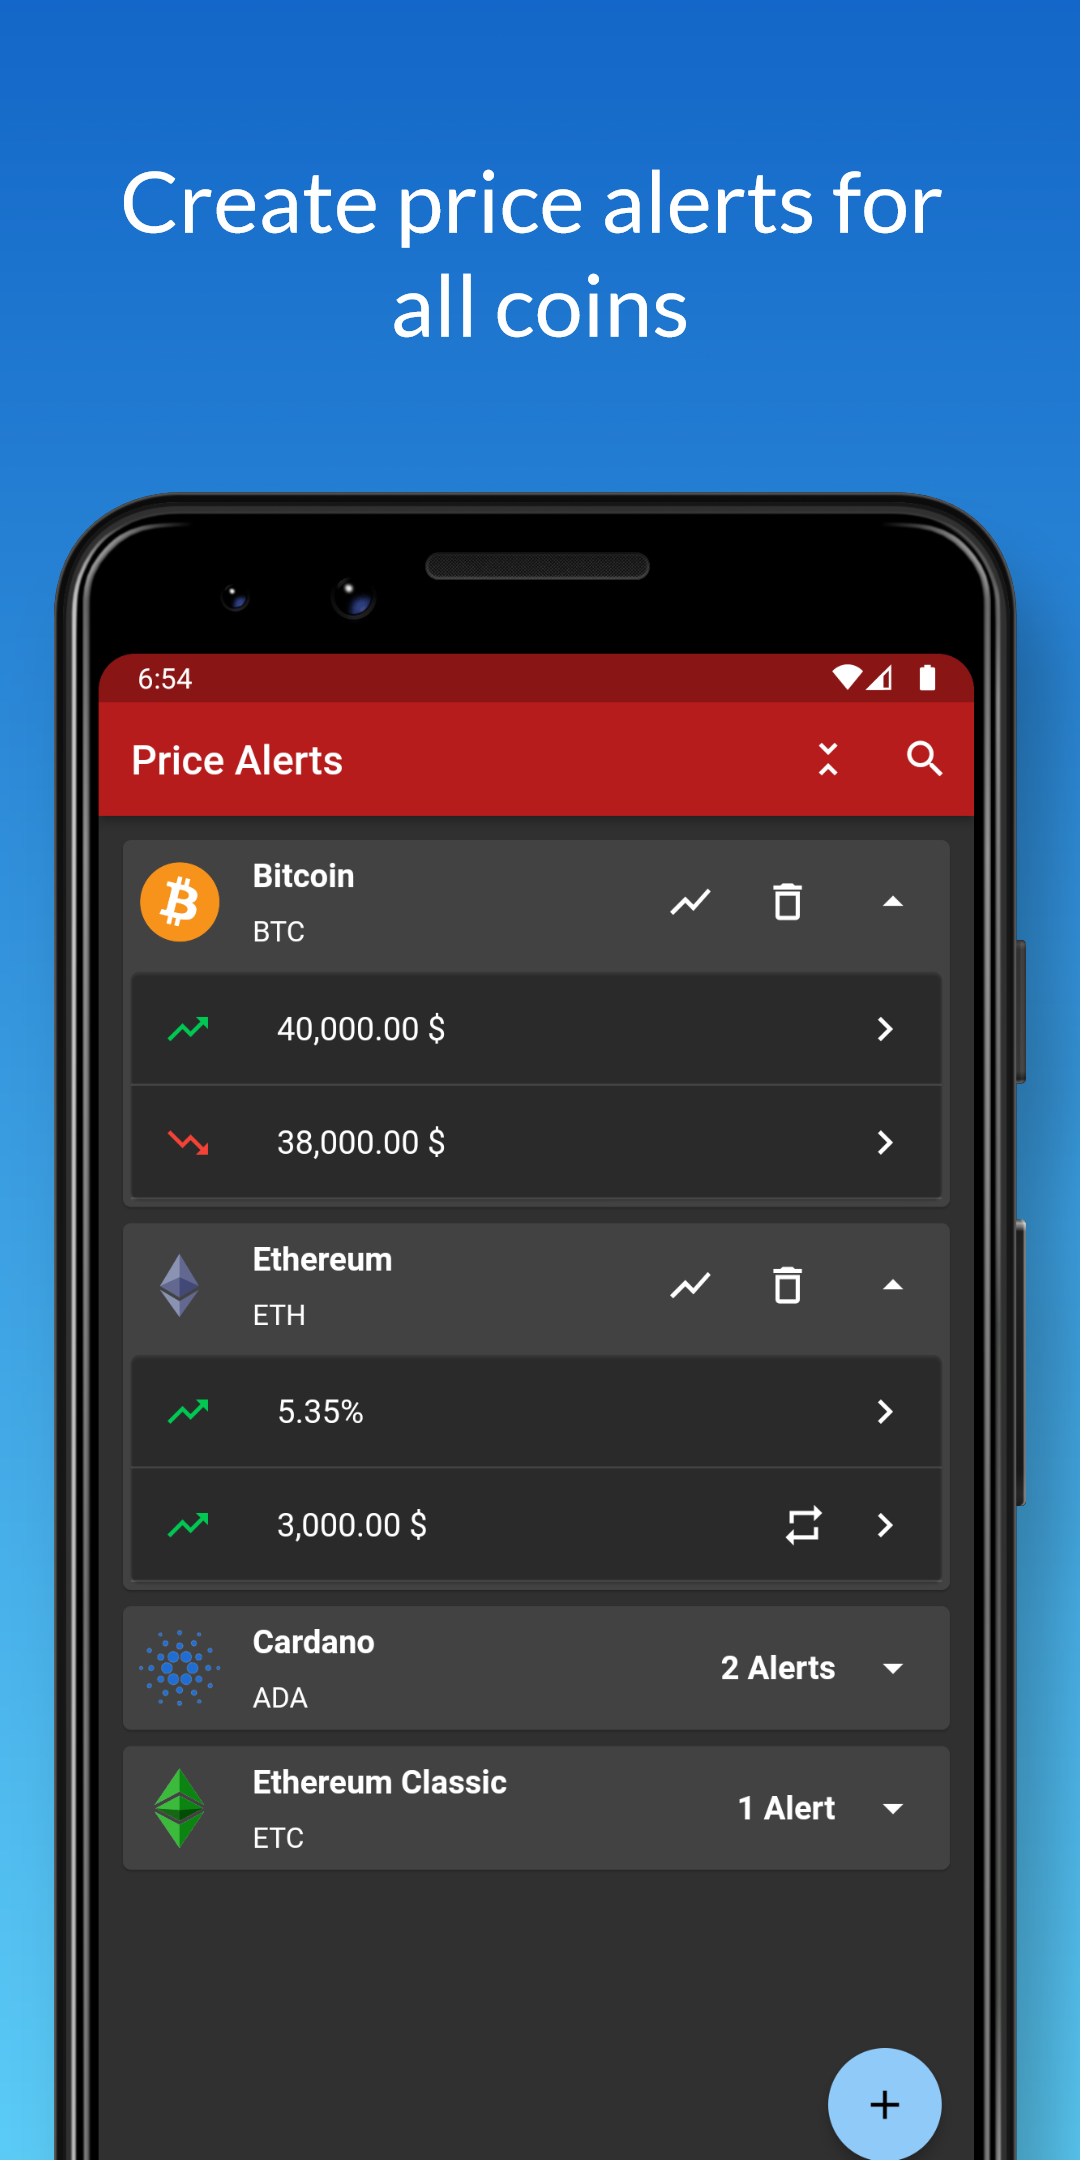 bitcoinhelp.fun – Cryptocurrency alerts, monitoring, notifications, trading information